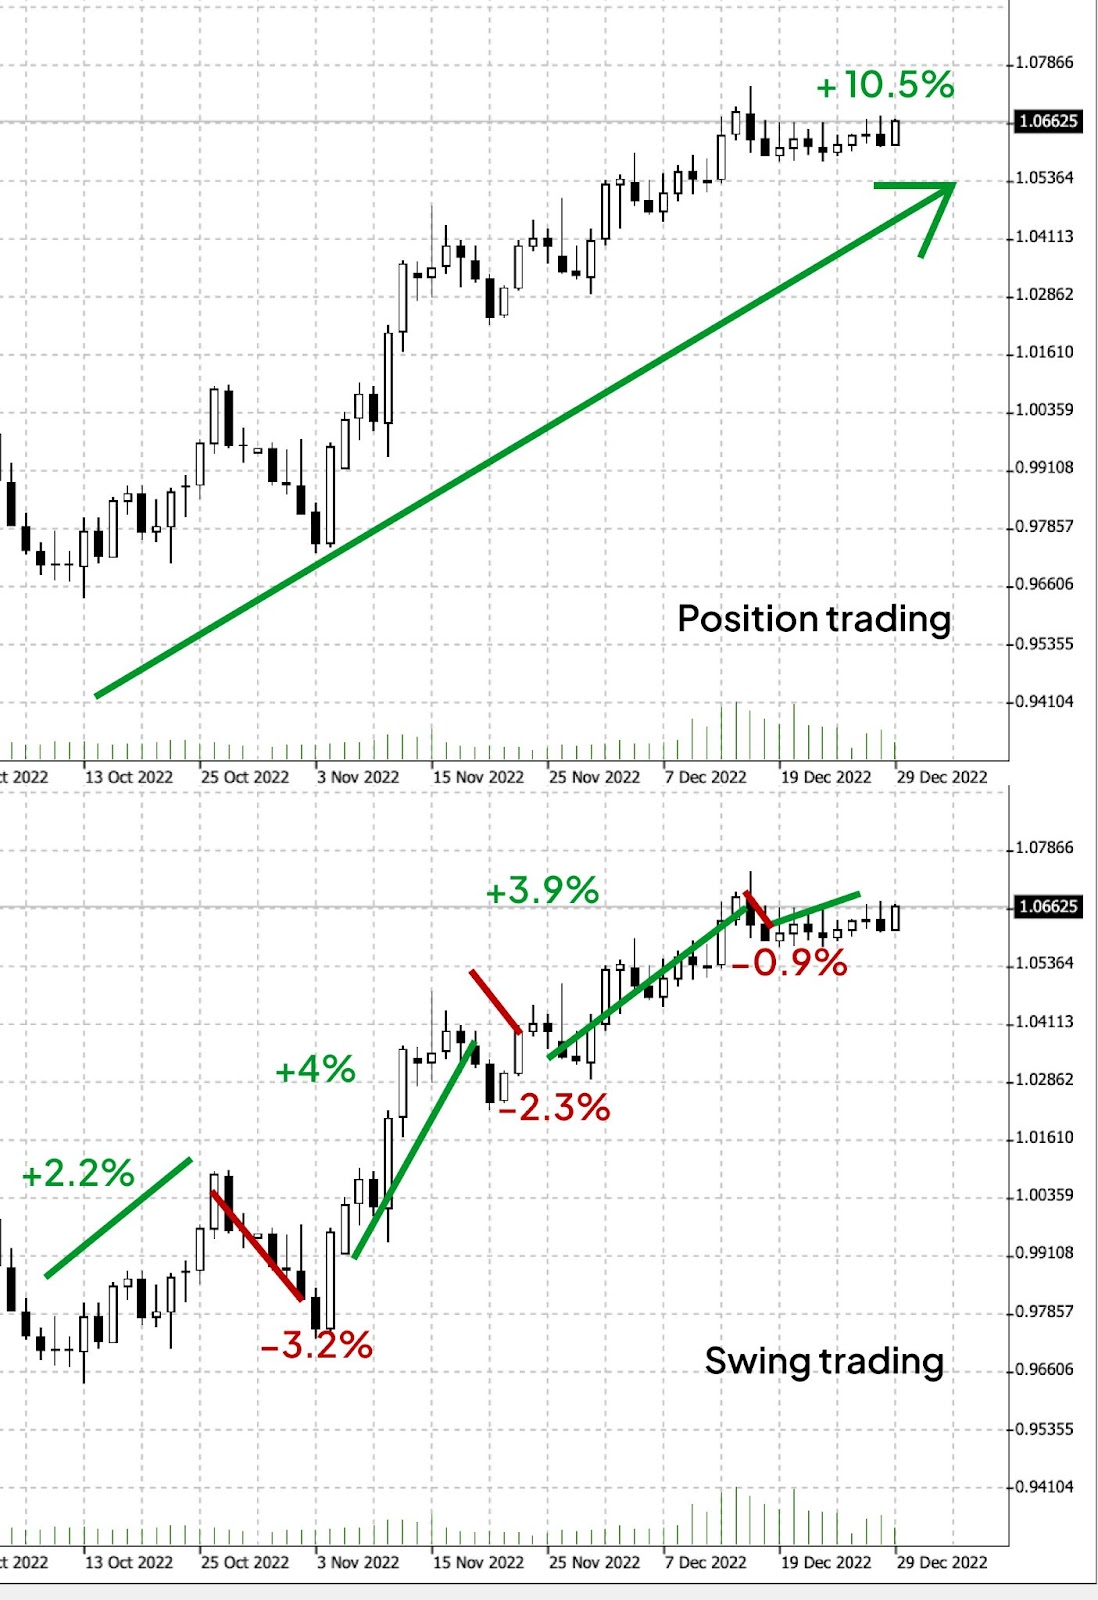 Long-term or position trading compared to swing trading